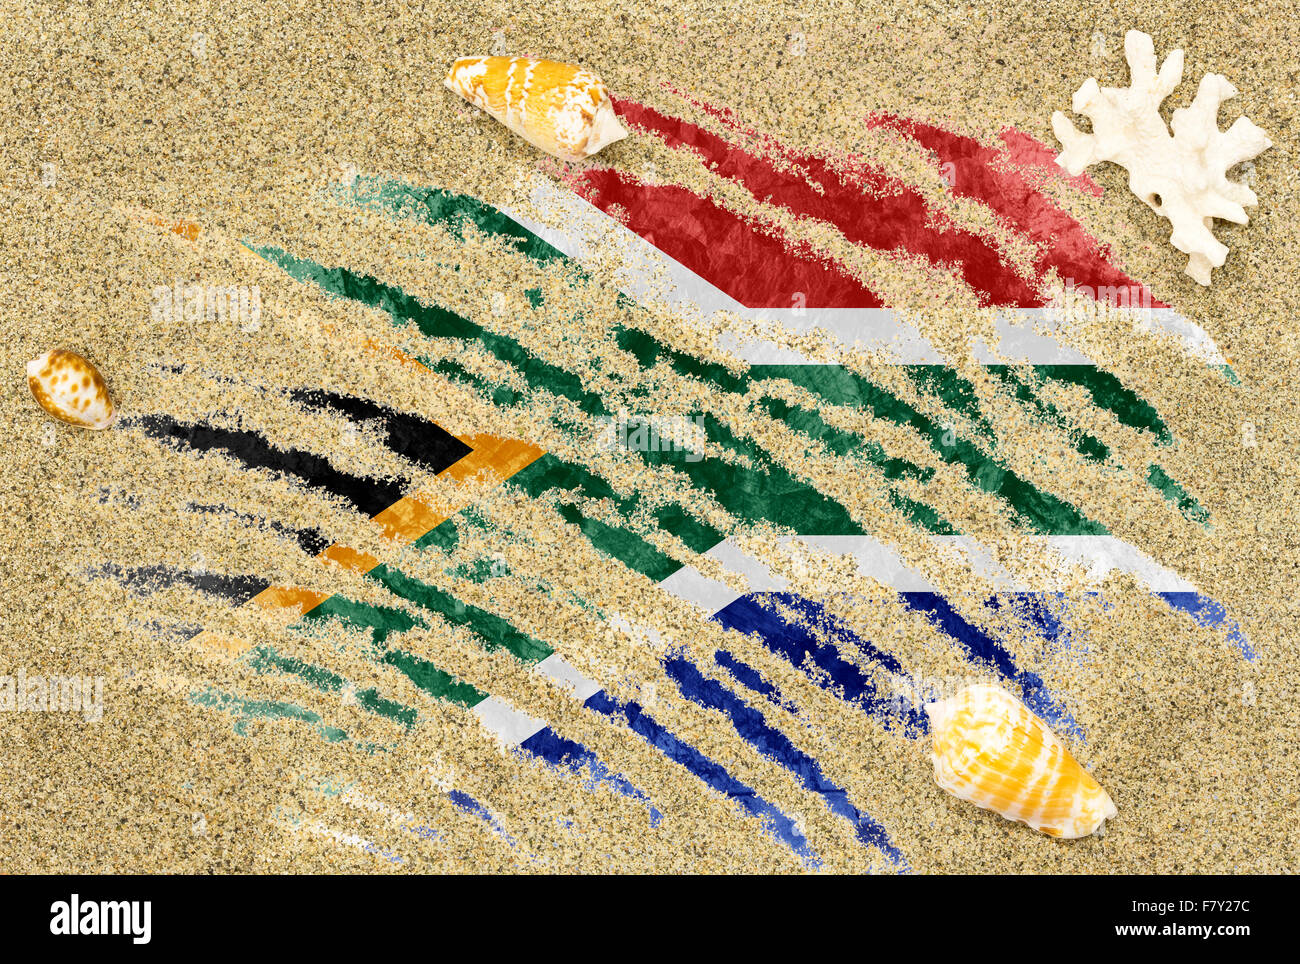 National country flag of South Africa under a beach background with sand, sea shells and coral Stock Photo